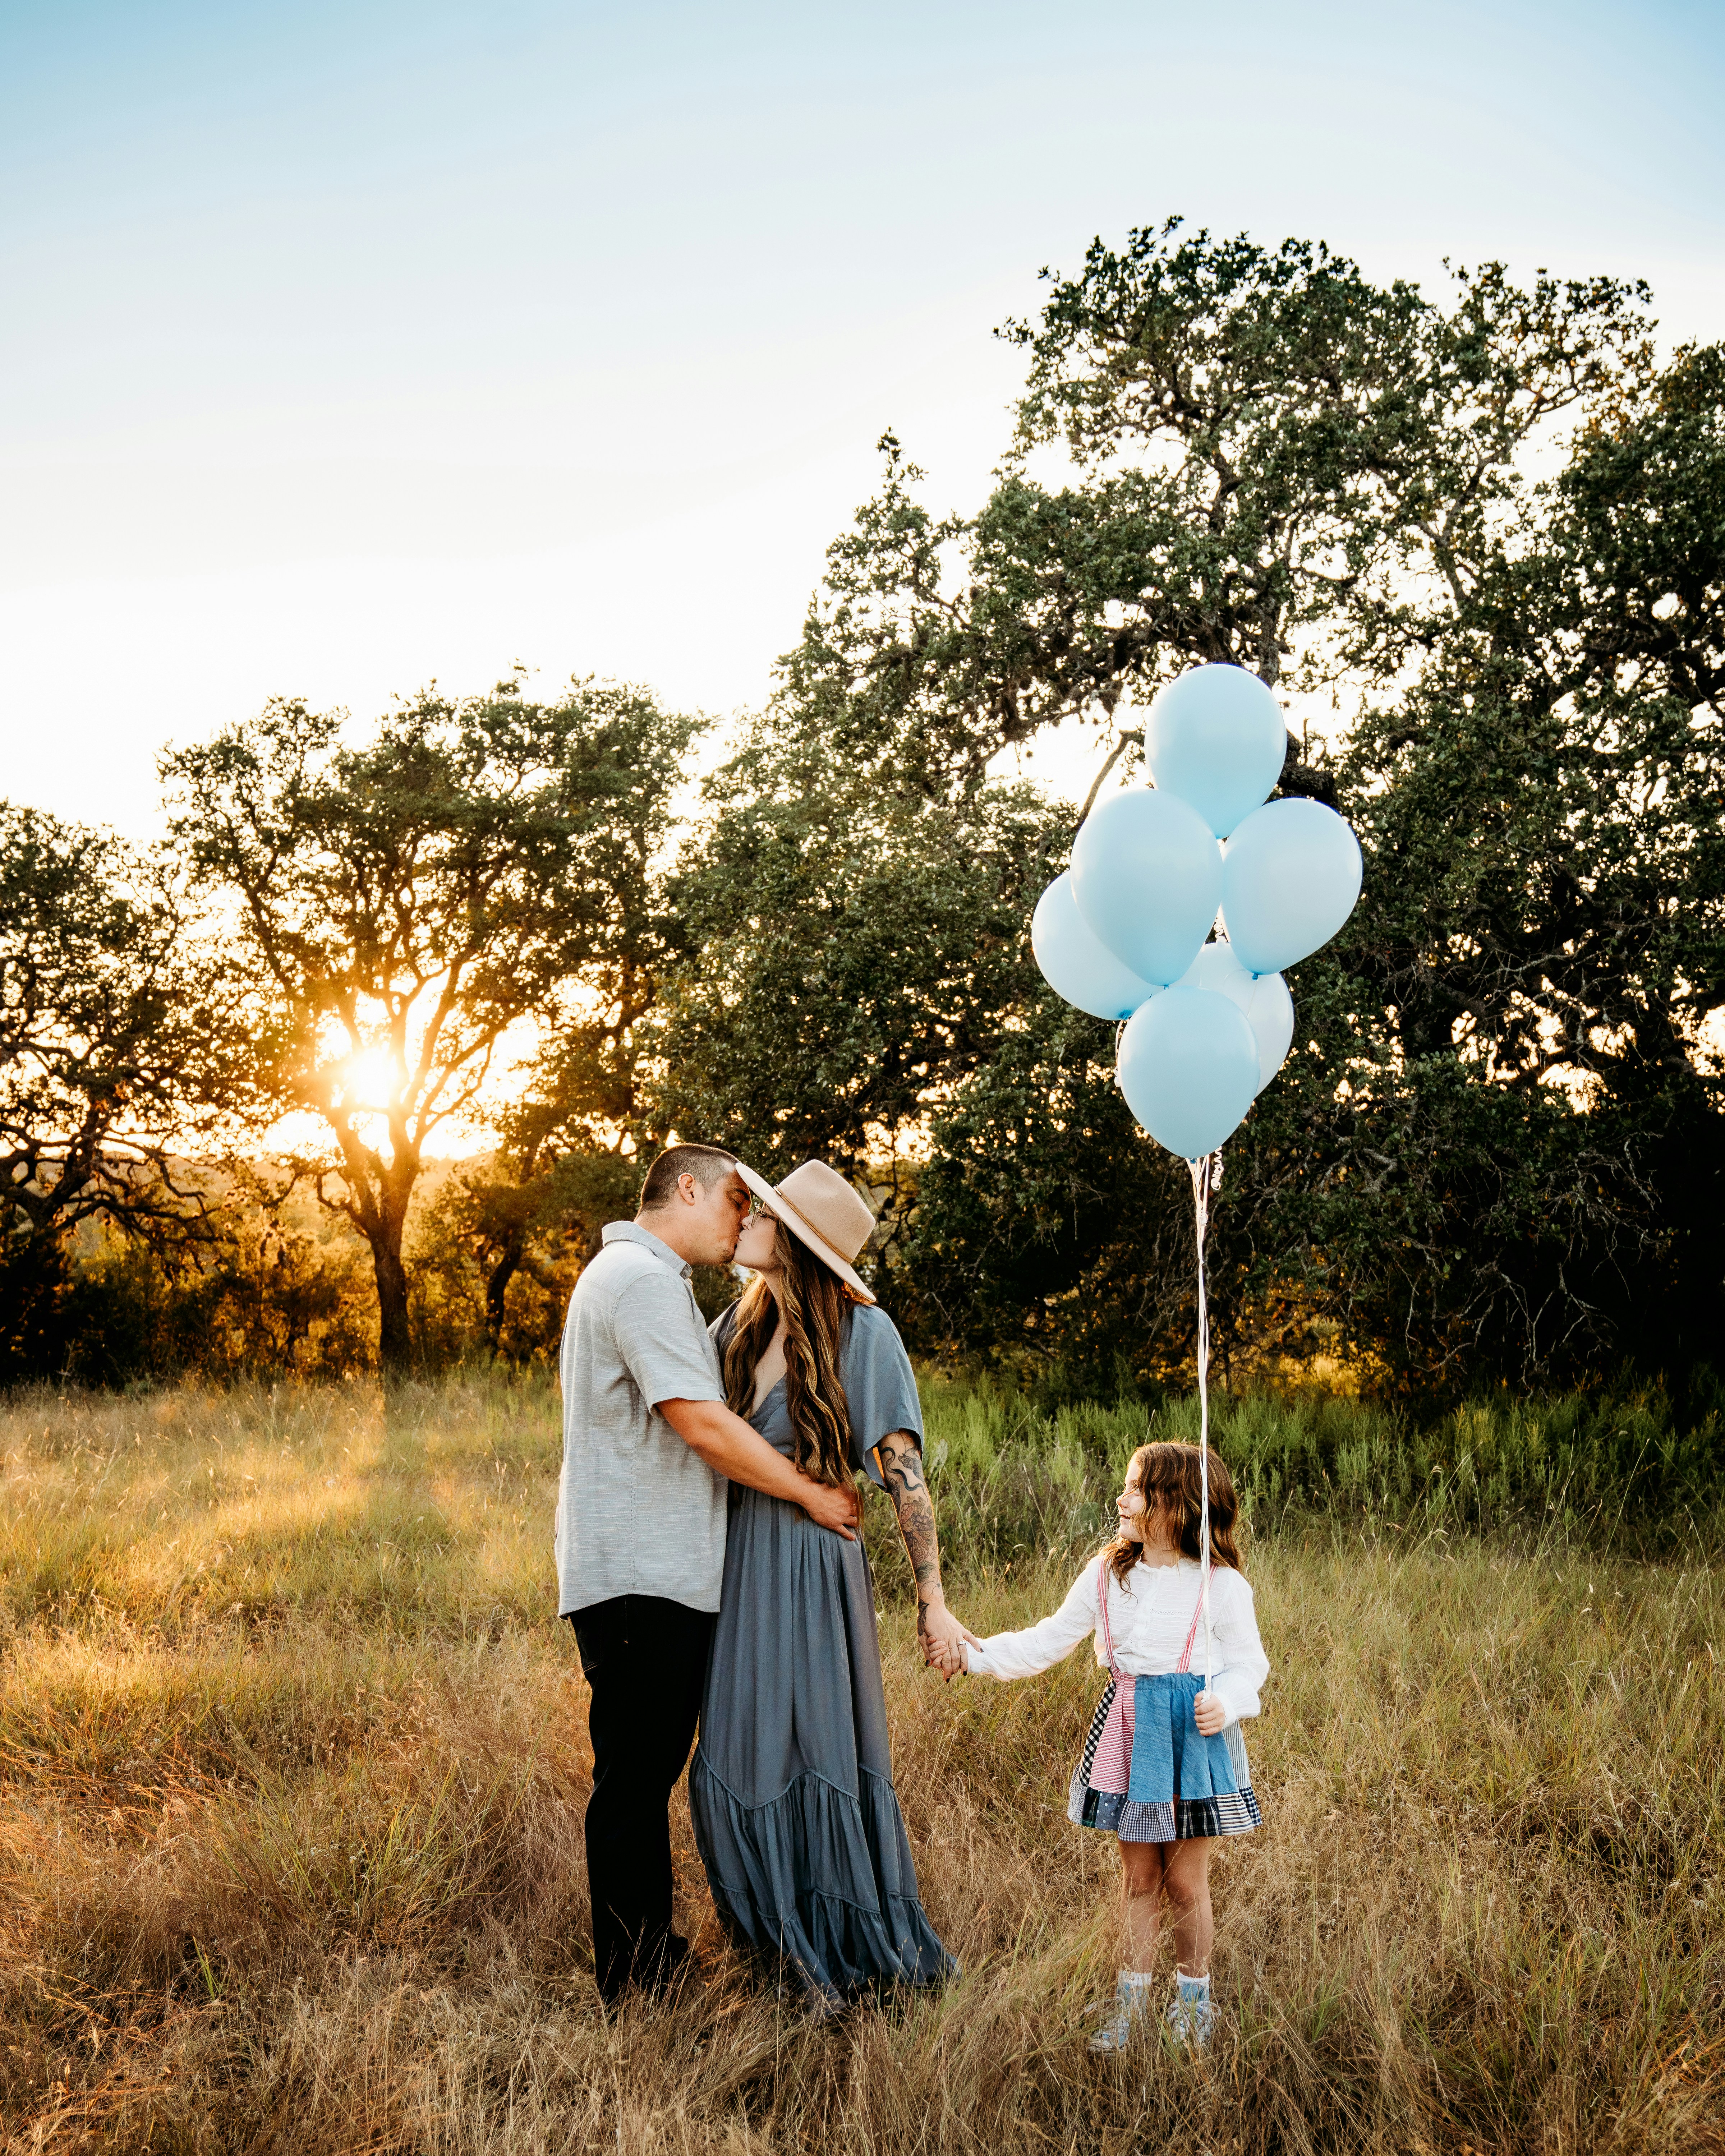 great photo recipe,how to photograph a couple of people that are holding some balloons